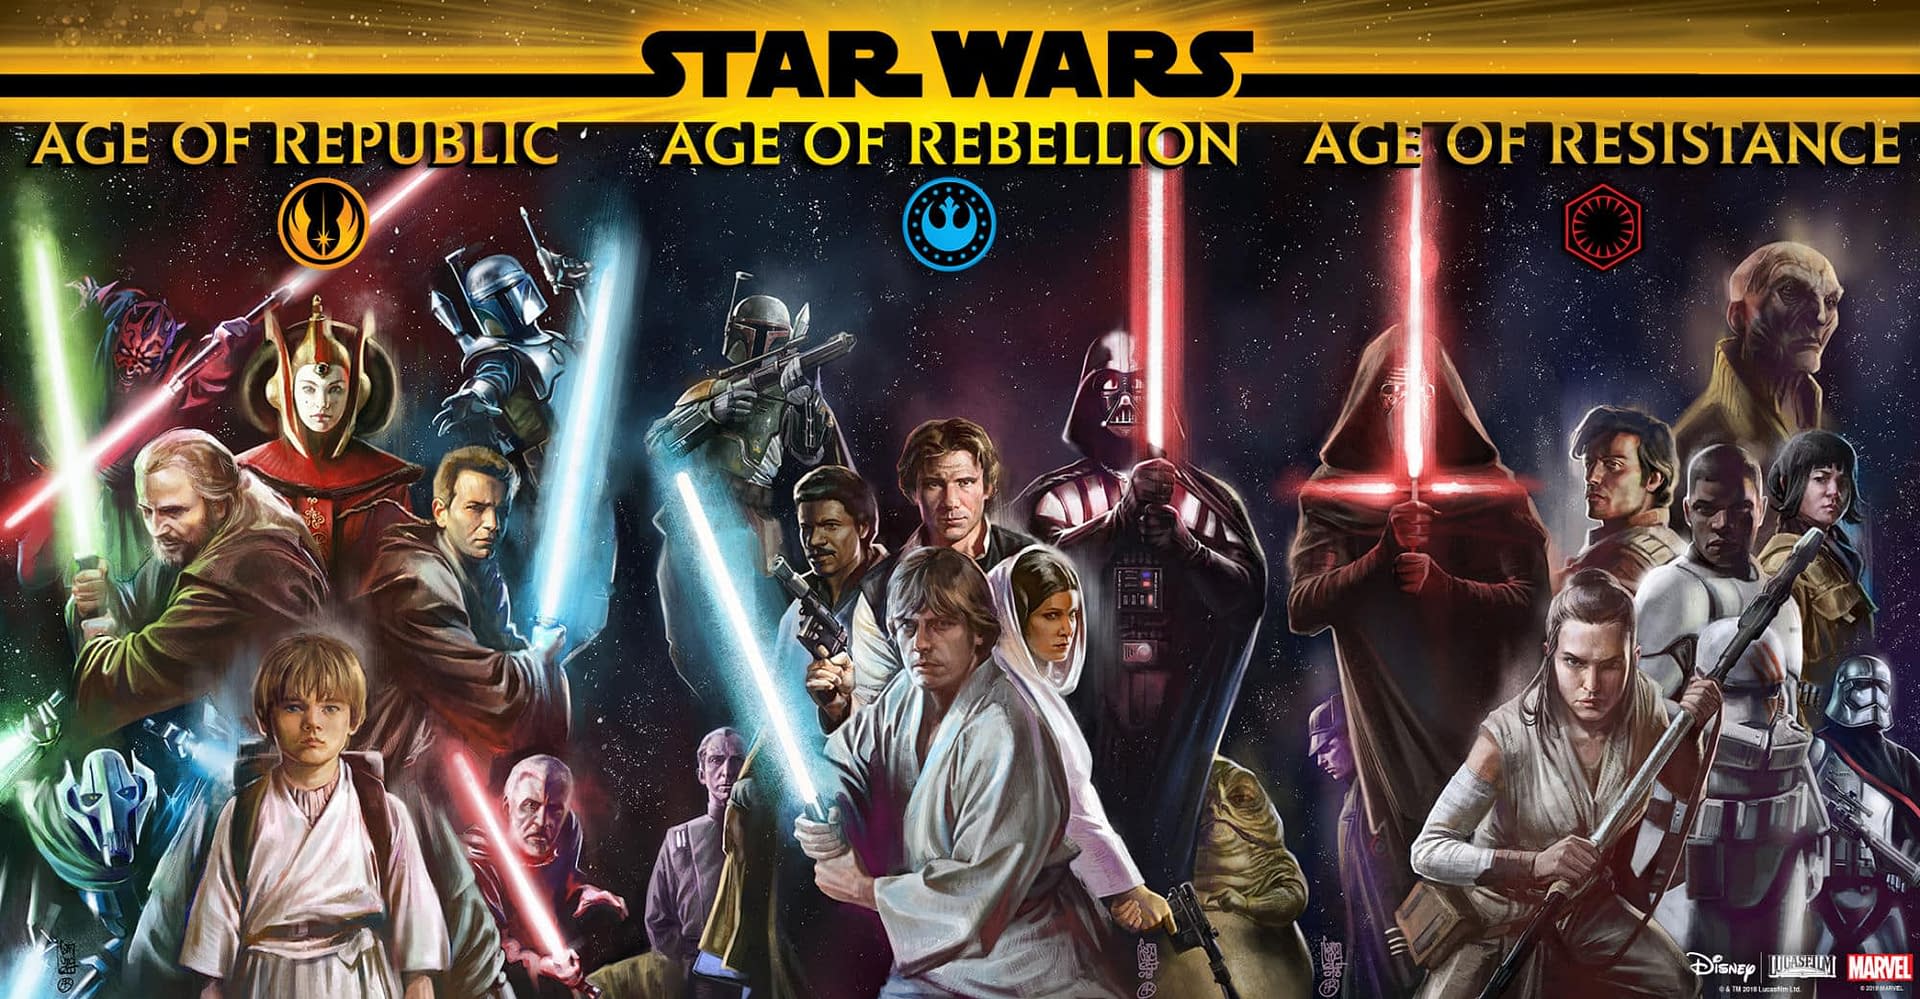 Marvel Announces Age of Star Wars, With New Stories From the Eras of All 3 Trilogies